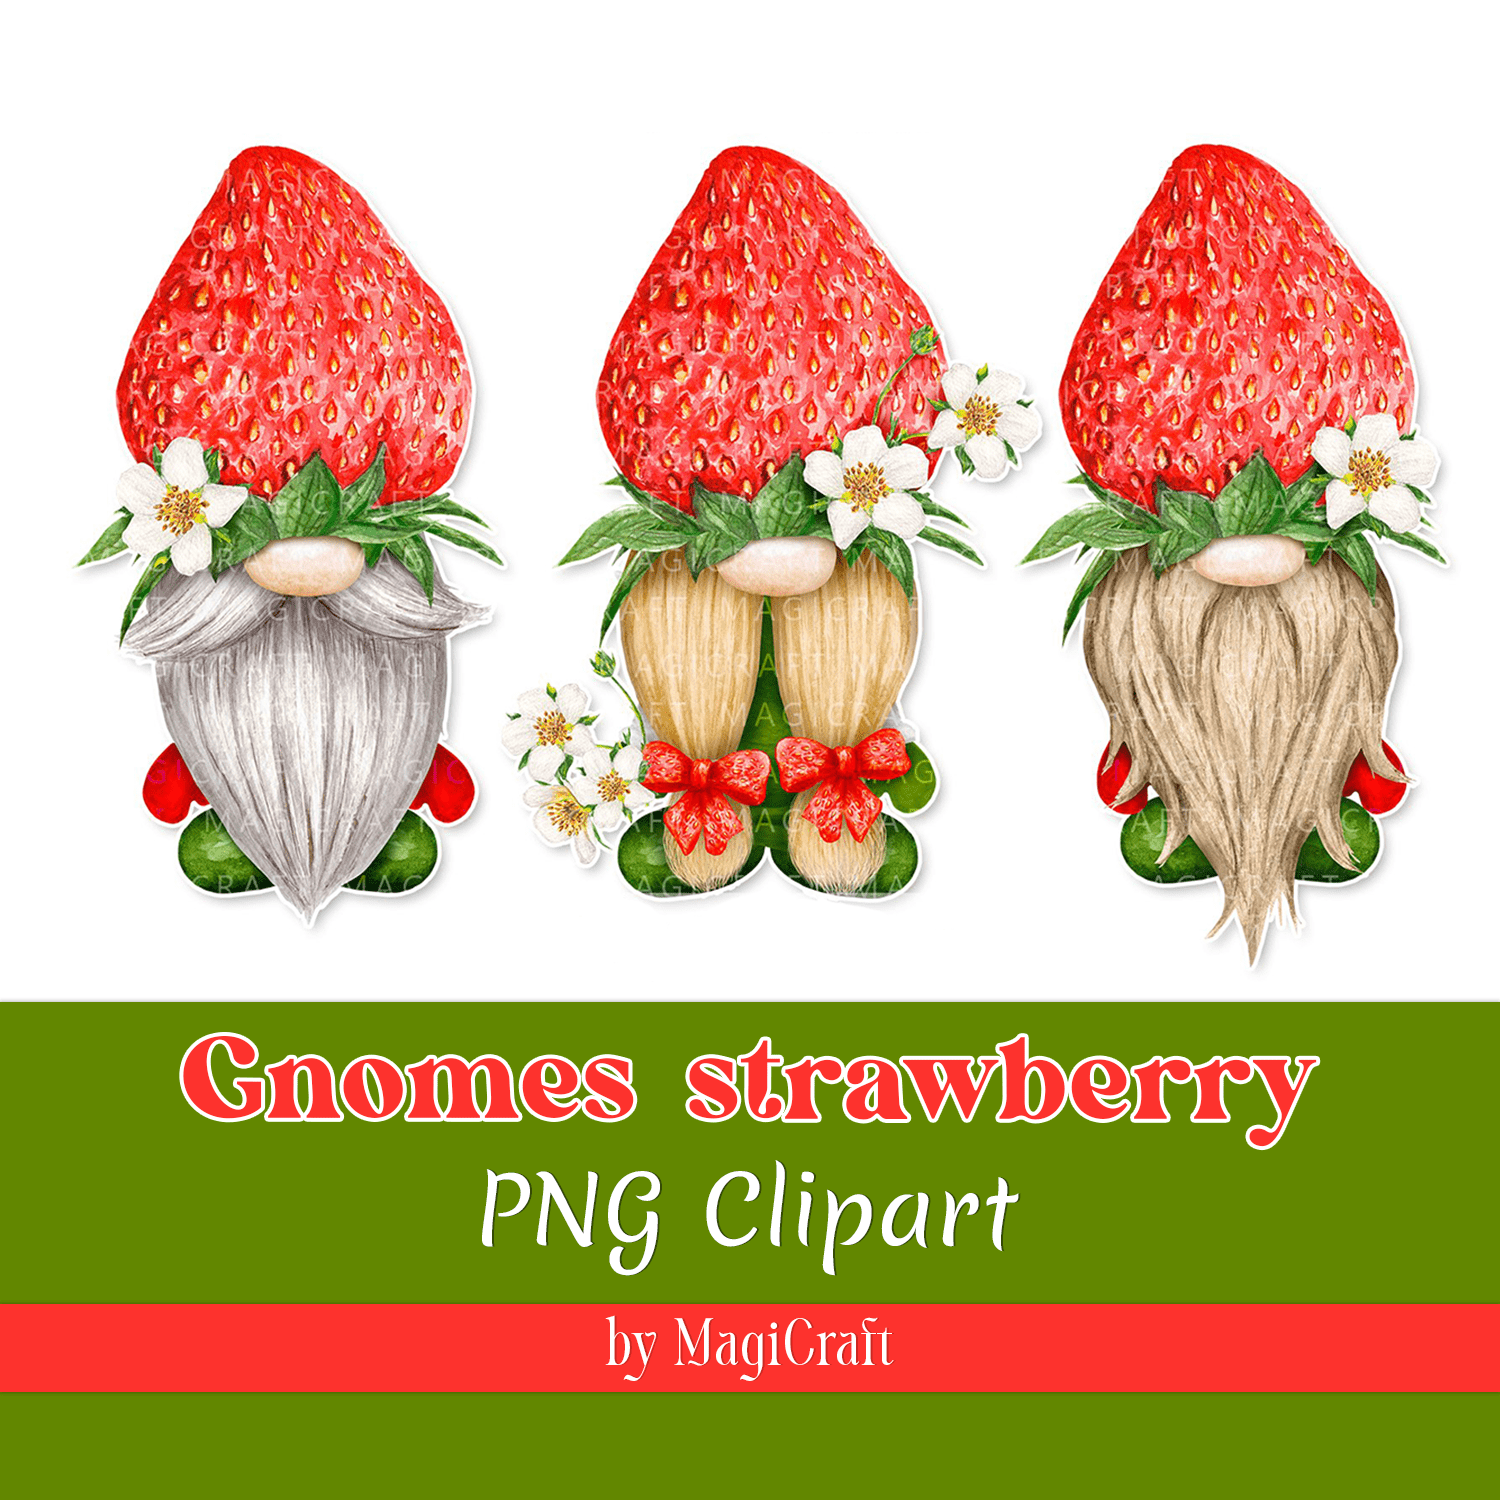 Gnomes Strawberry Png Clipart Watercolor Gonks Strawberry.